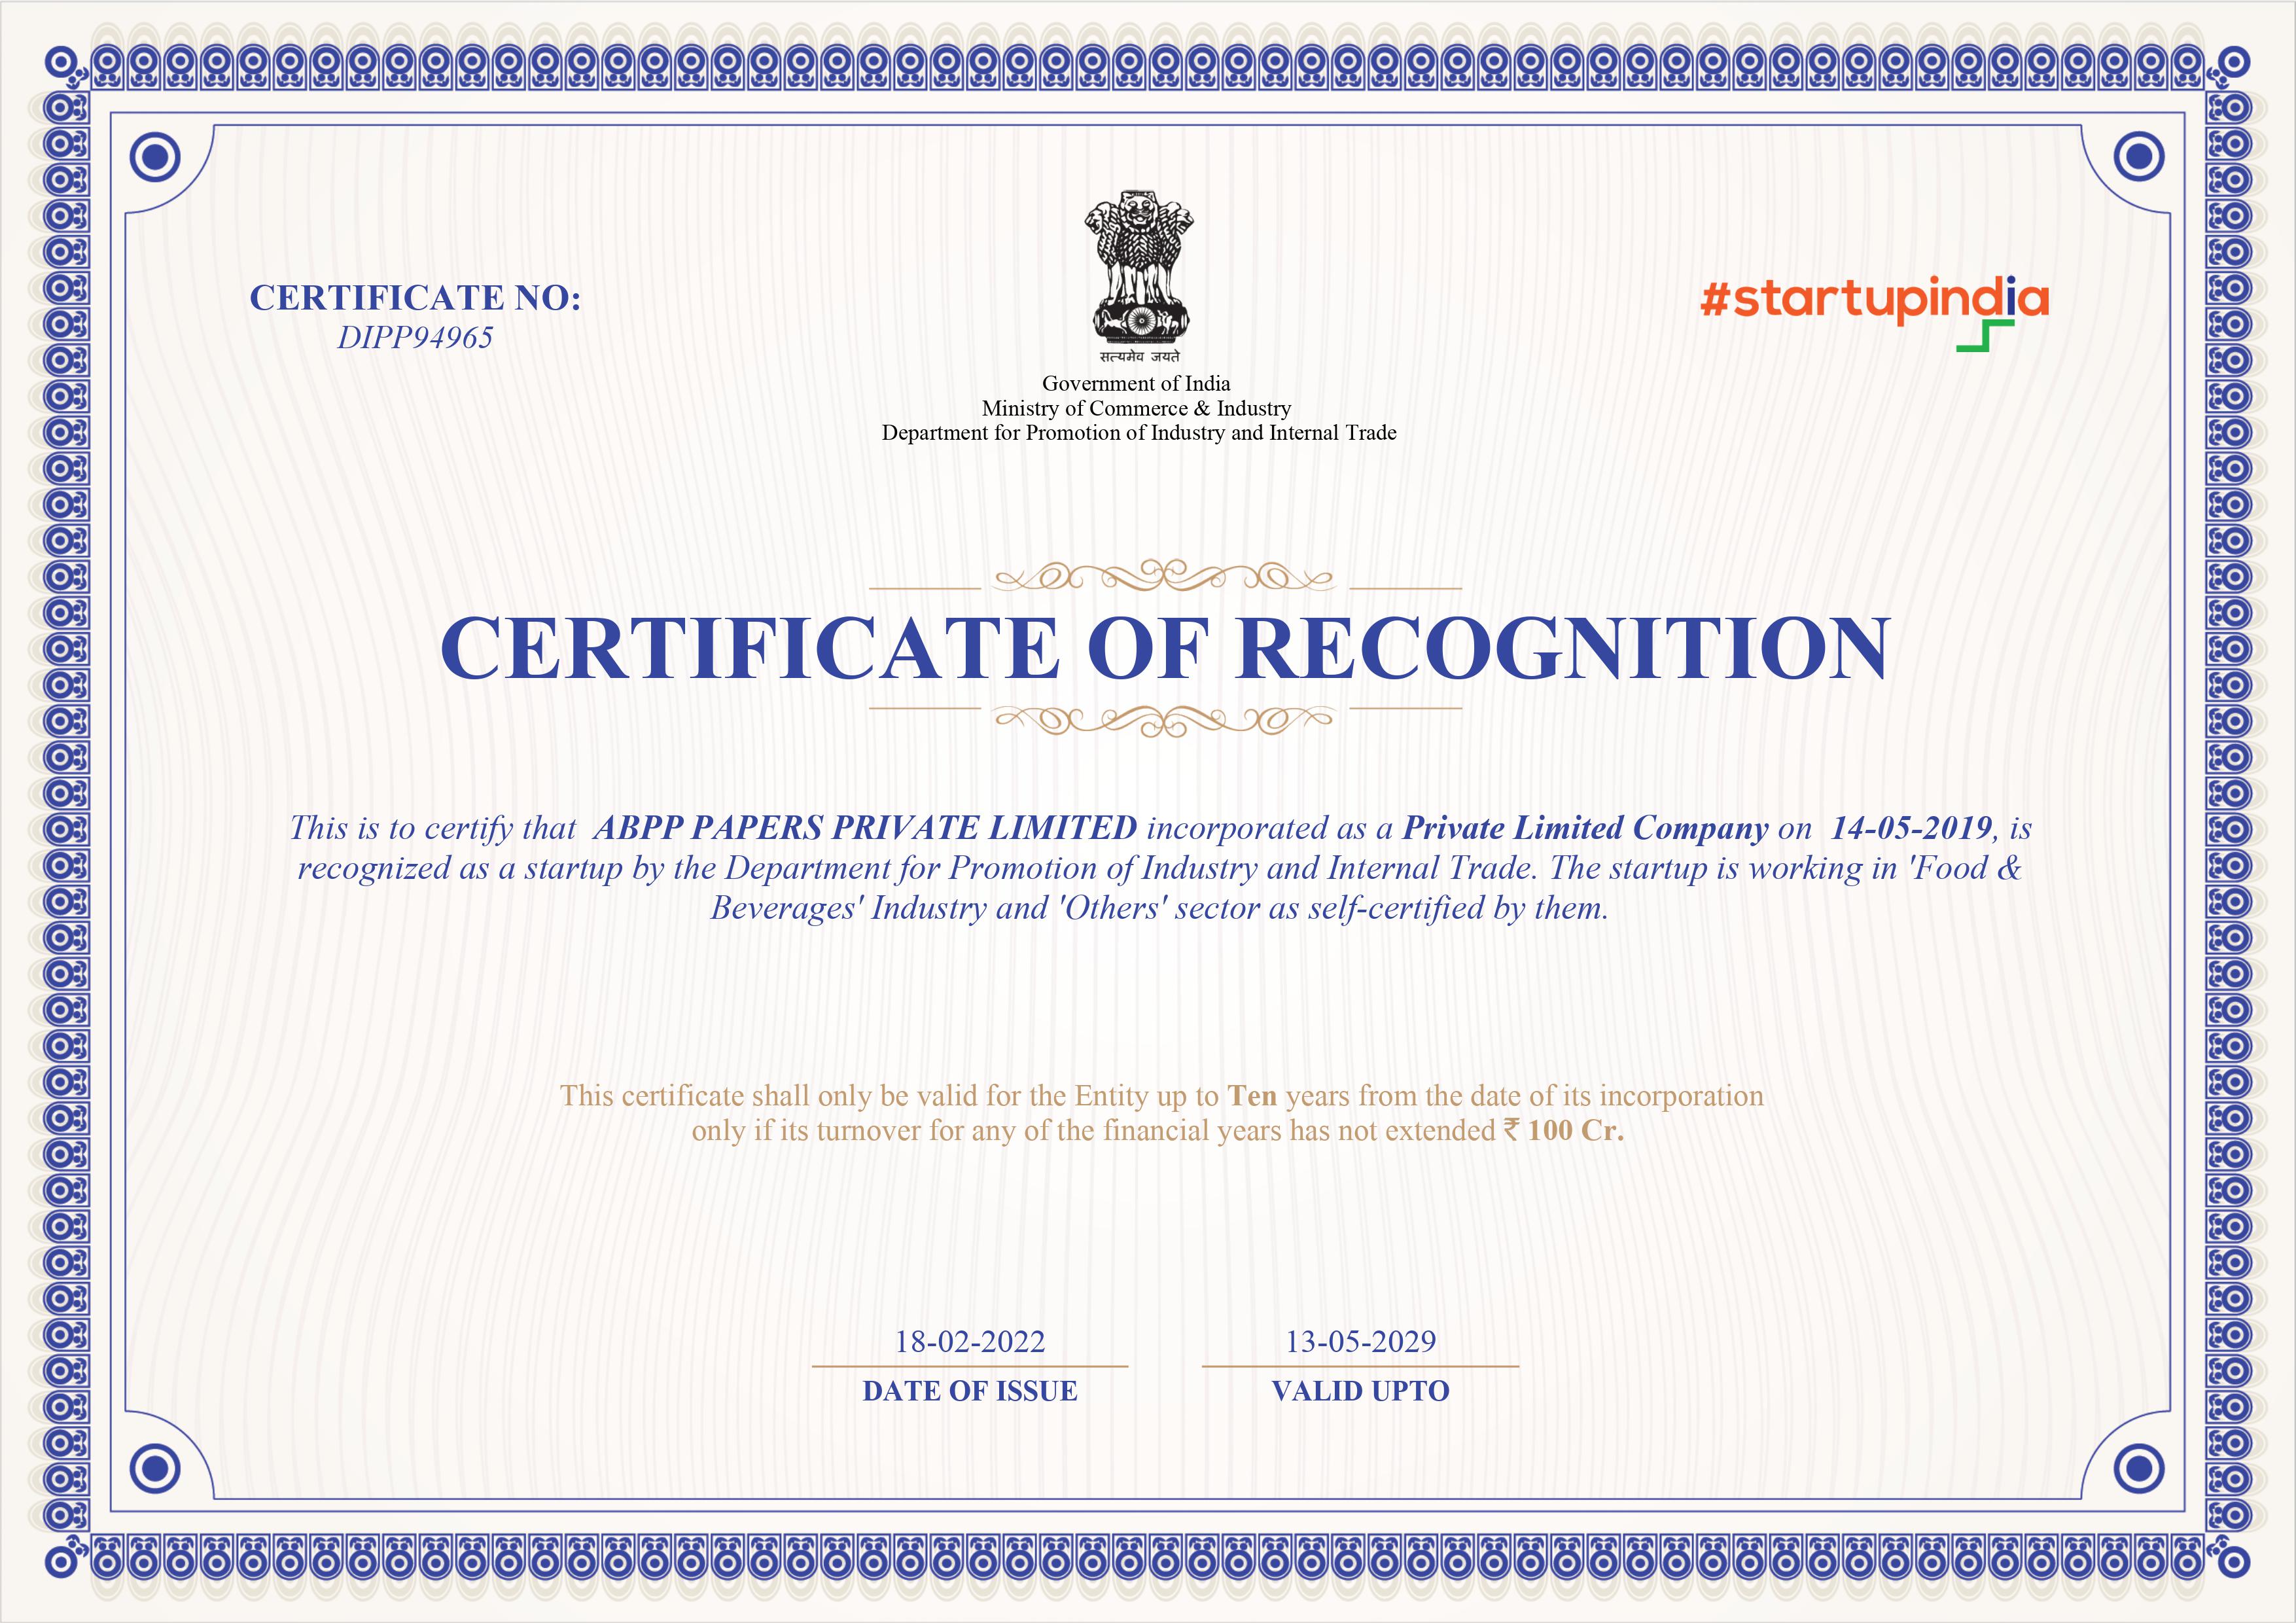 Startup India Certificate, ABPP Papers [DPIIT Recognition]